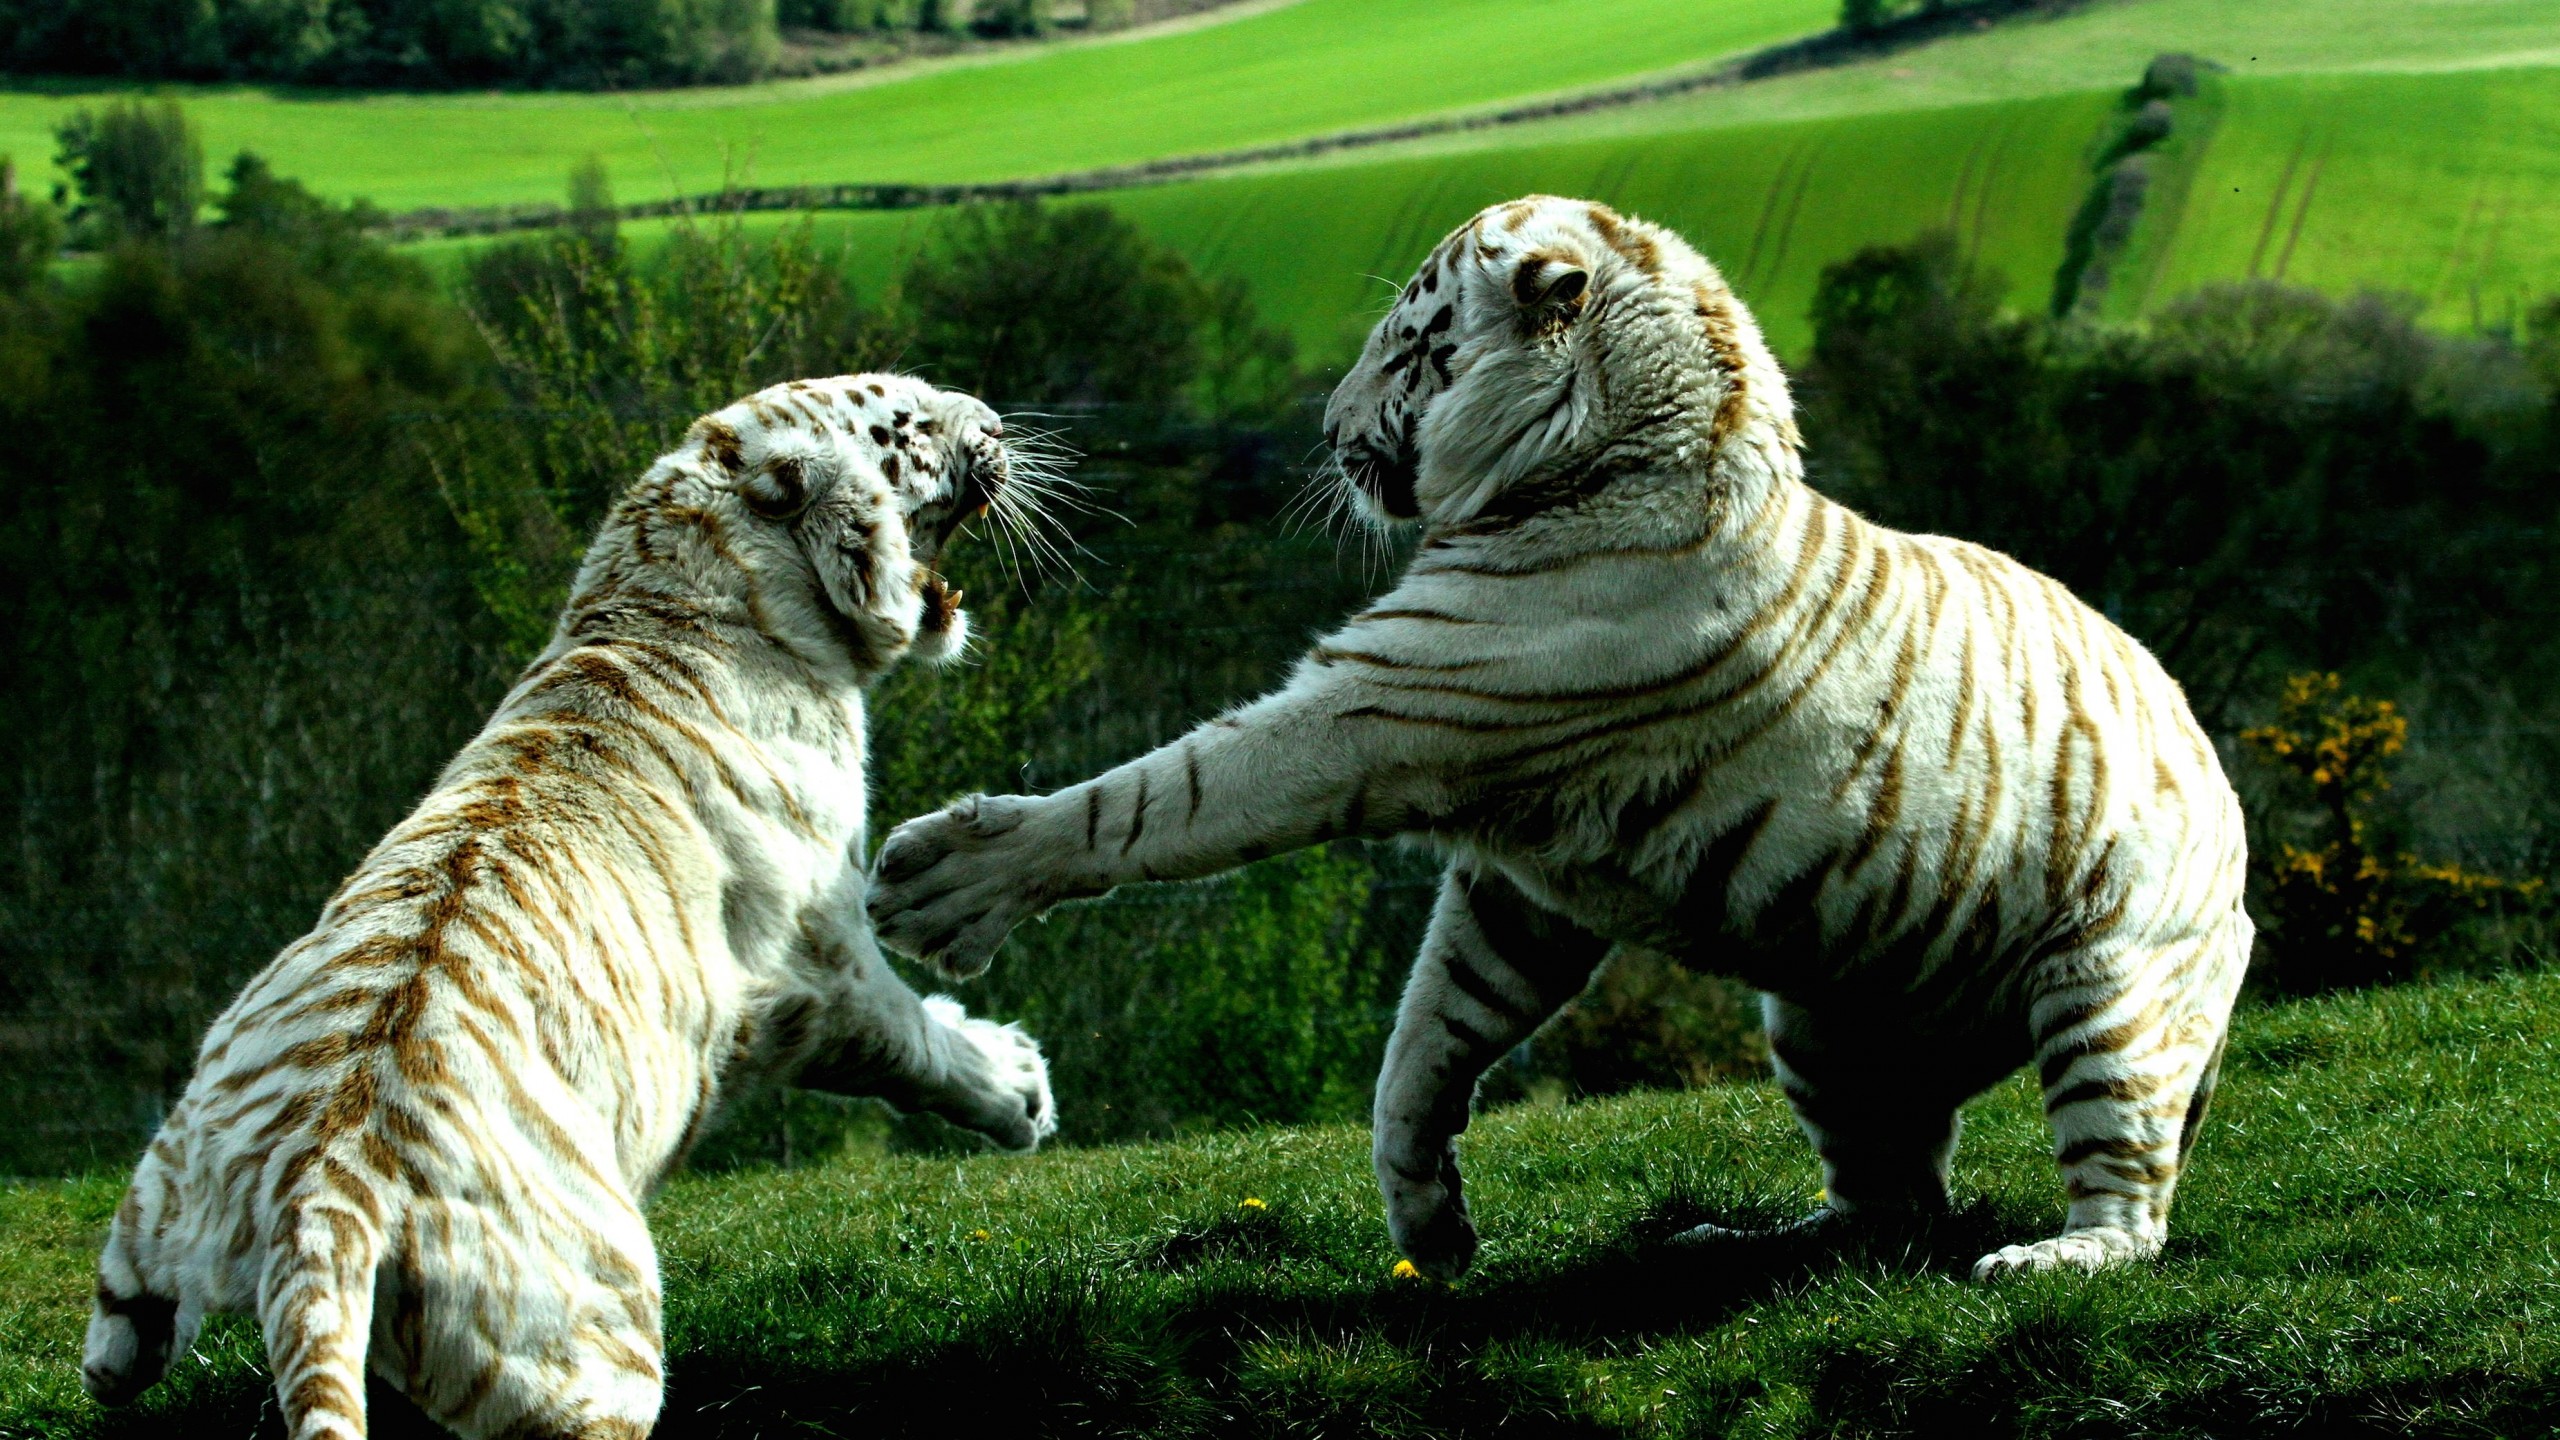 White Tigers Fighting Wallpaper for Social Media YouTube Channel Art